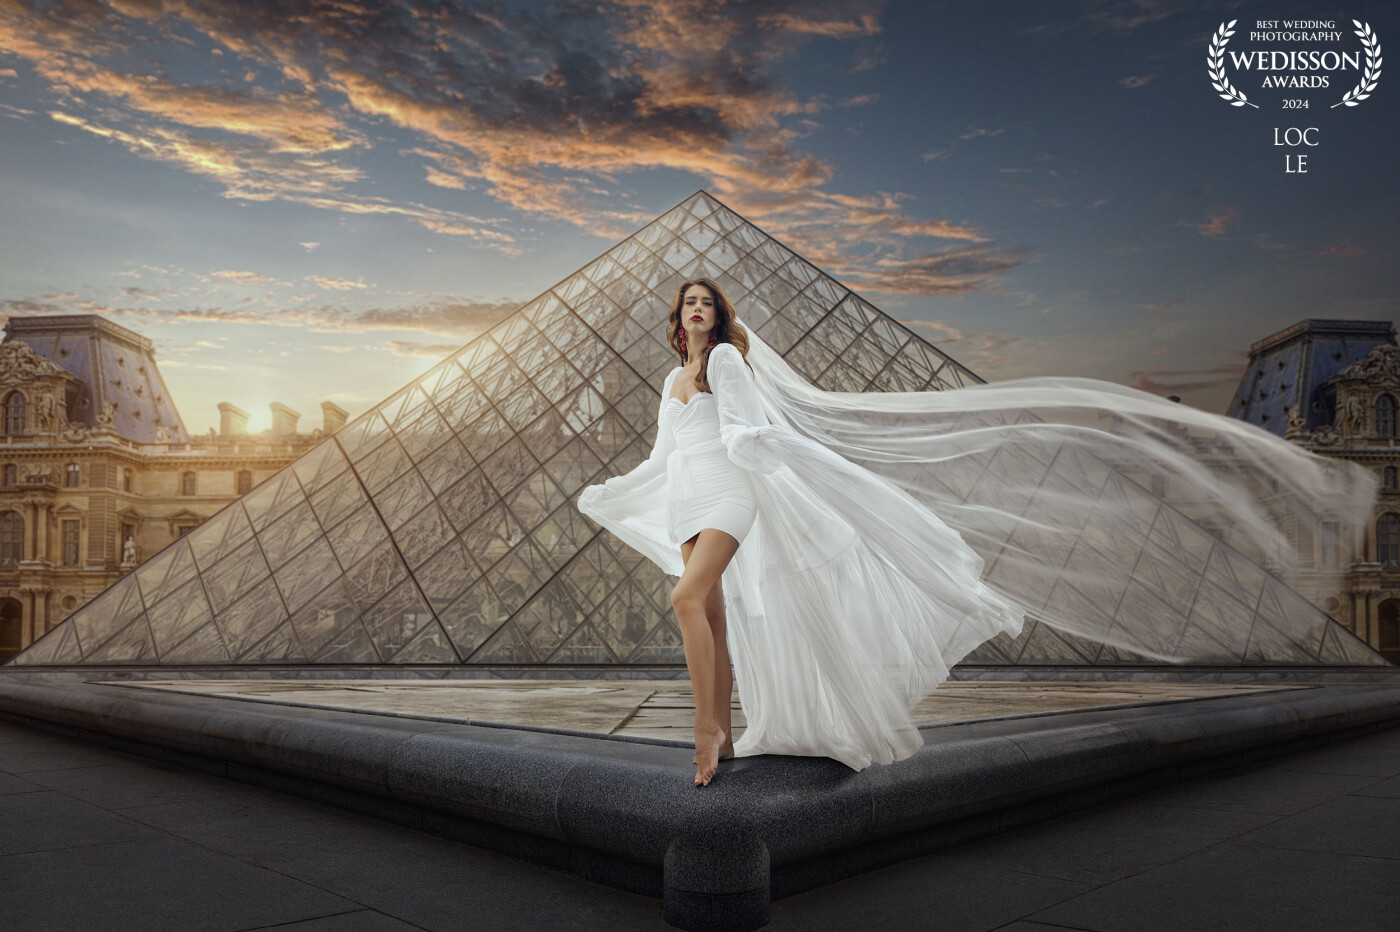 Taken in front of the Louvre Museum,  our beautiful bride graced the heart of Paris with her timeless beauty.